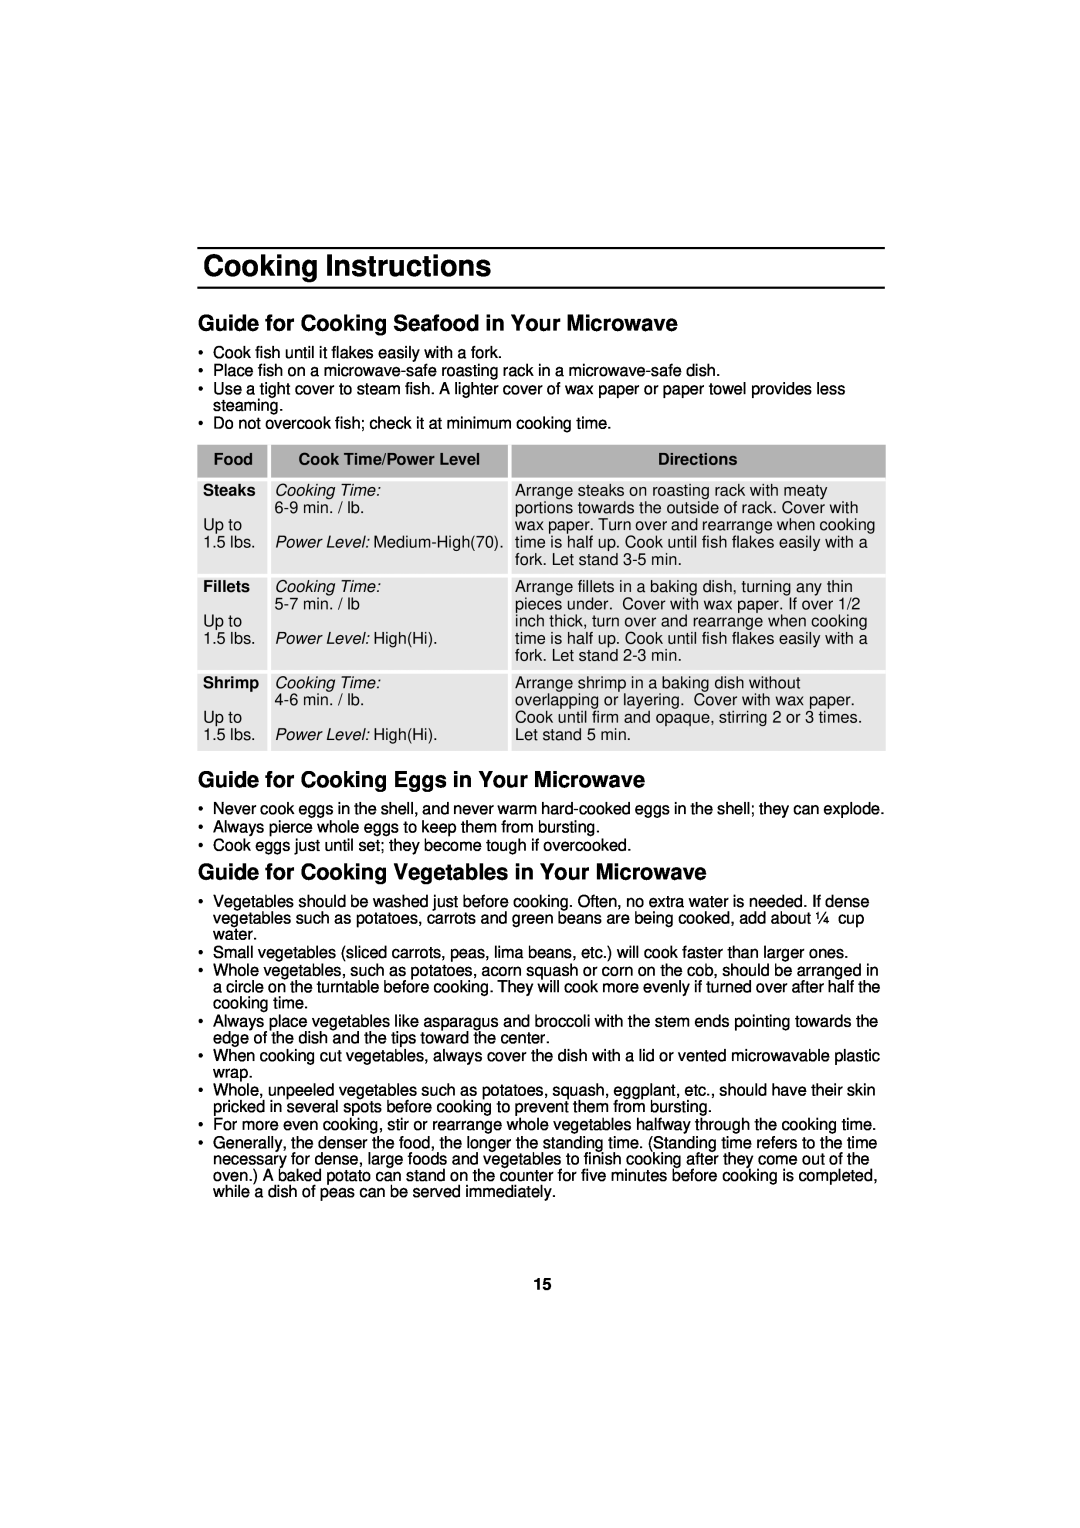 Samsung DE68-01931A-01 Guide for Cooking Seafood in Your Microwave, Guide for Cooking Eggs in Your Microwave, Cooking Time 